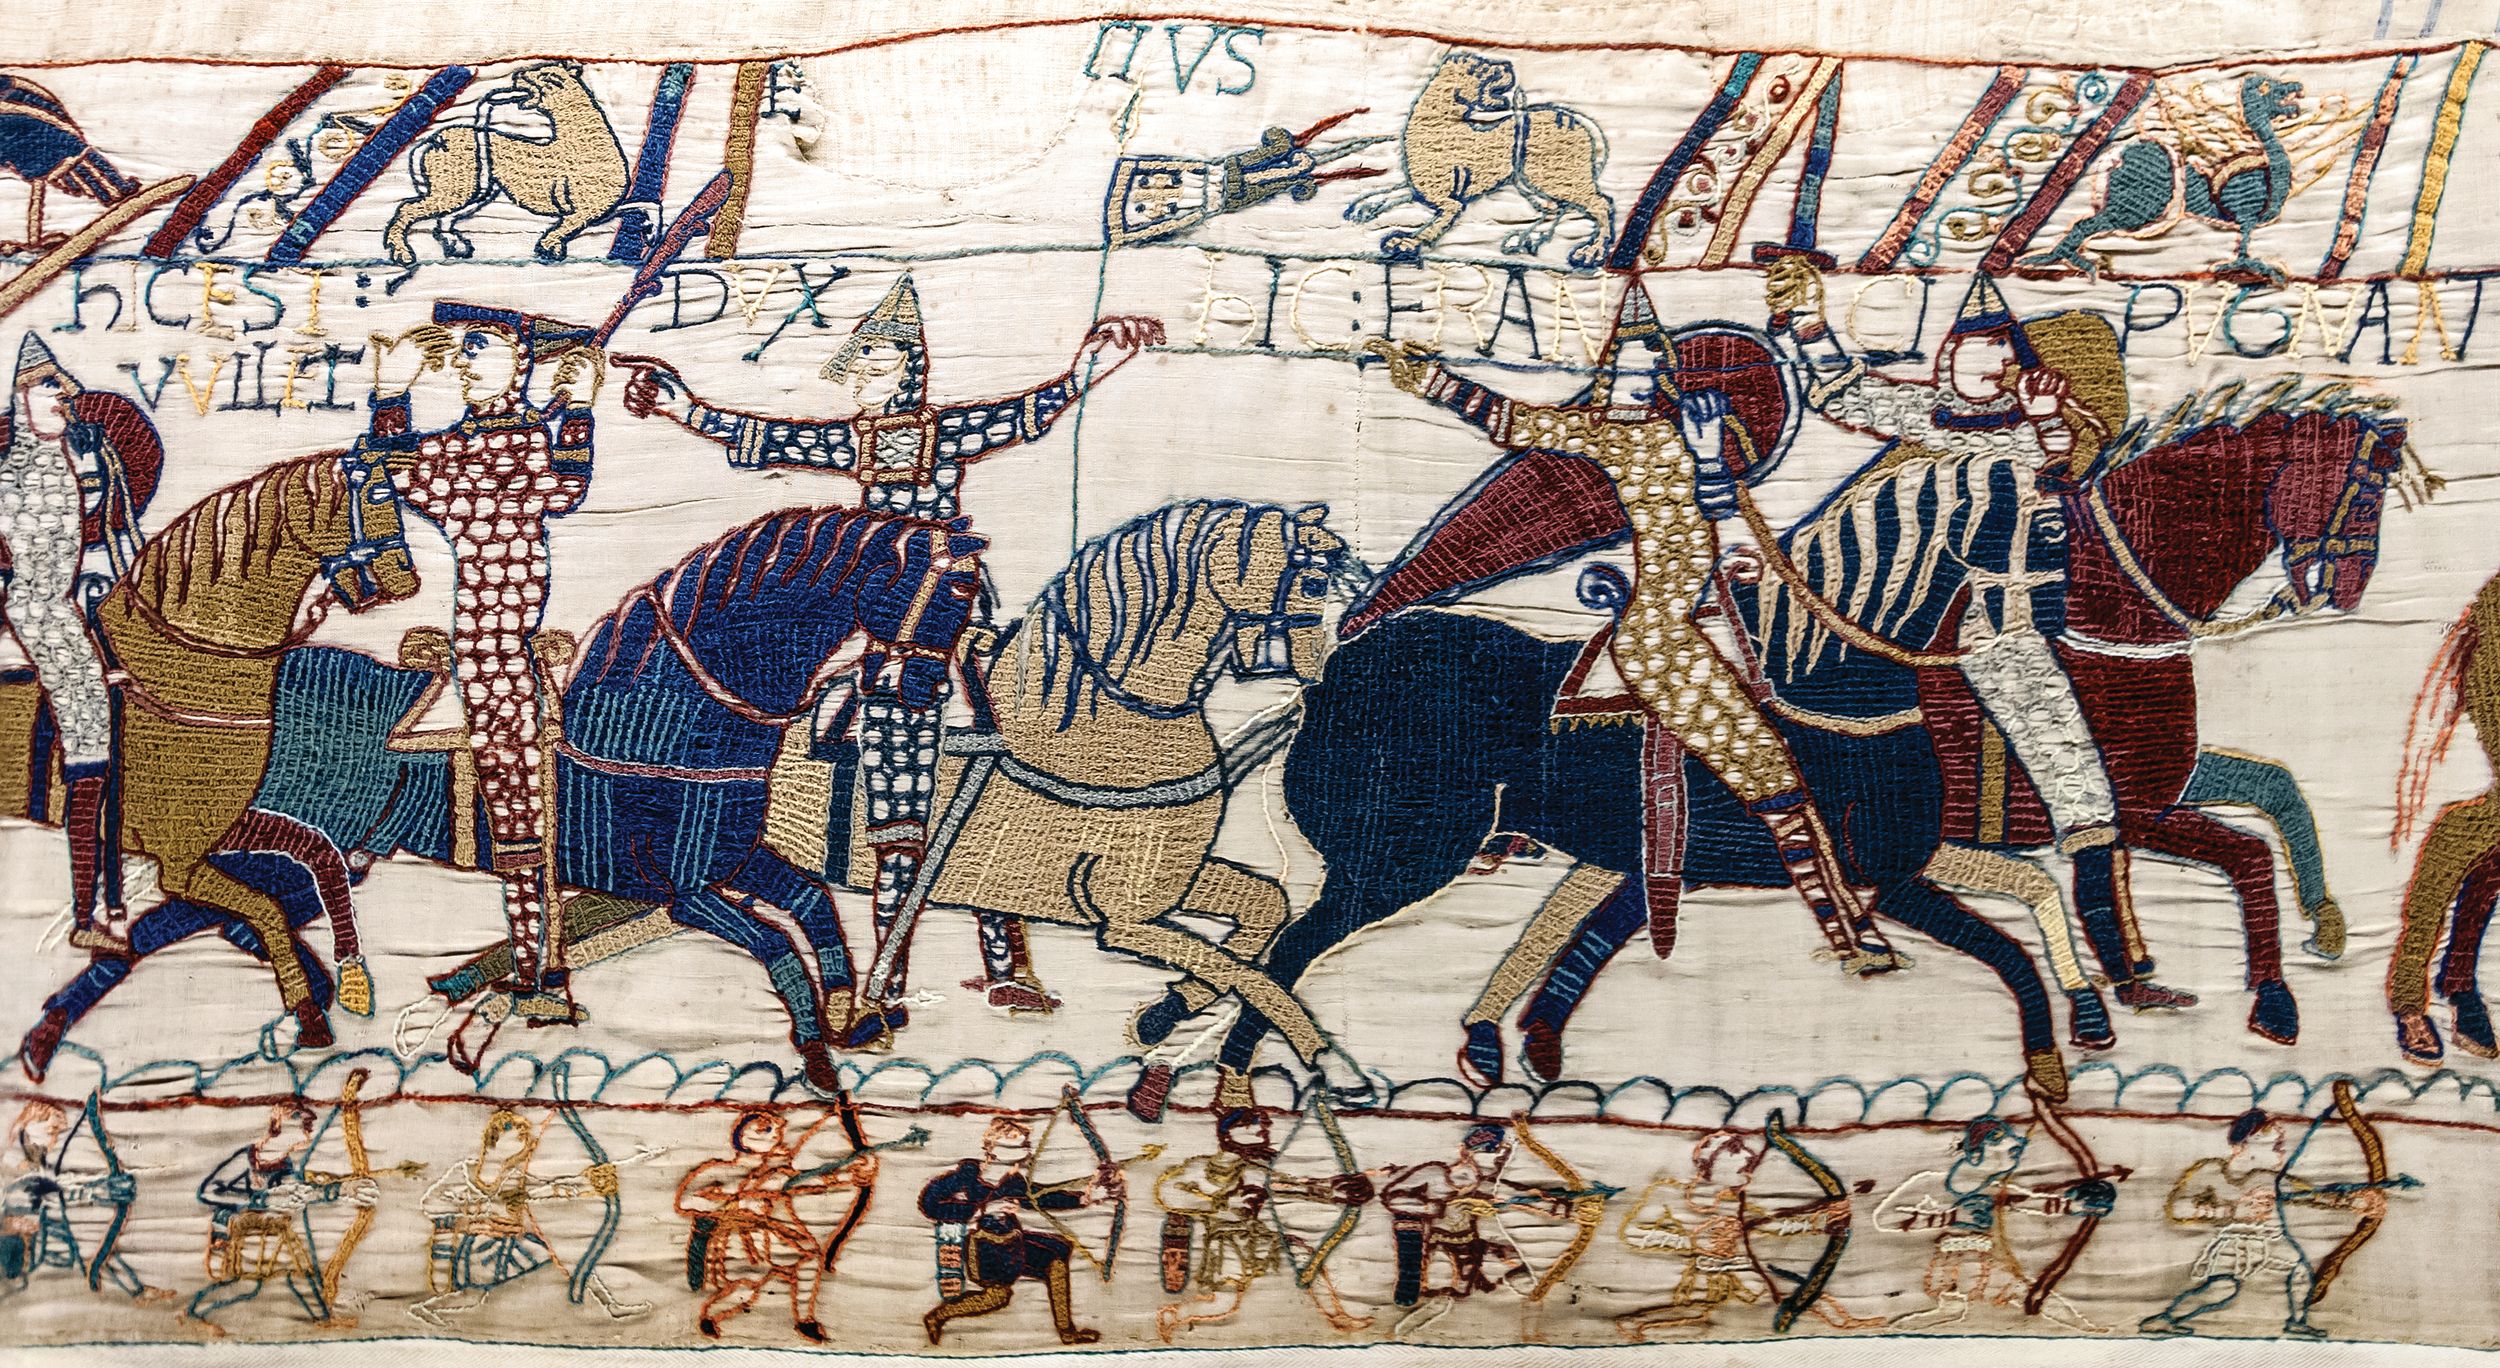 A closeup of the 224-foot-long Bayeaux Tapestry, an 11th century textile work depicting the conquest of England by William, Duke of Normandy in 1066.